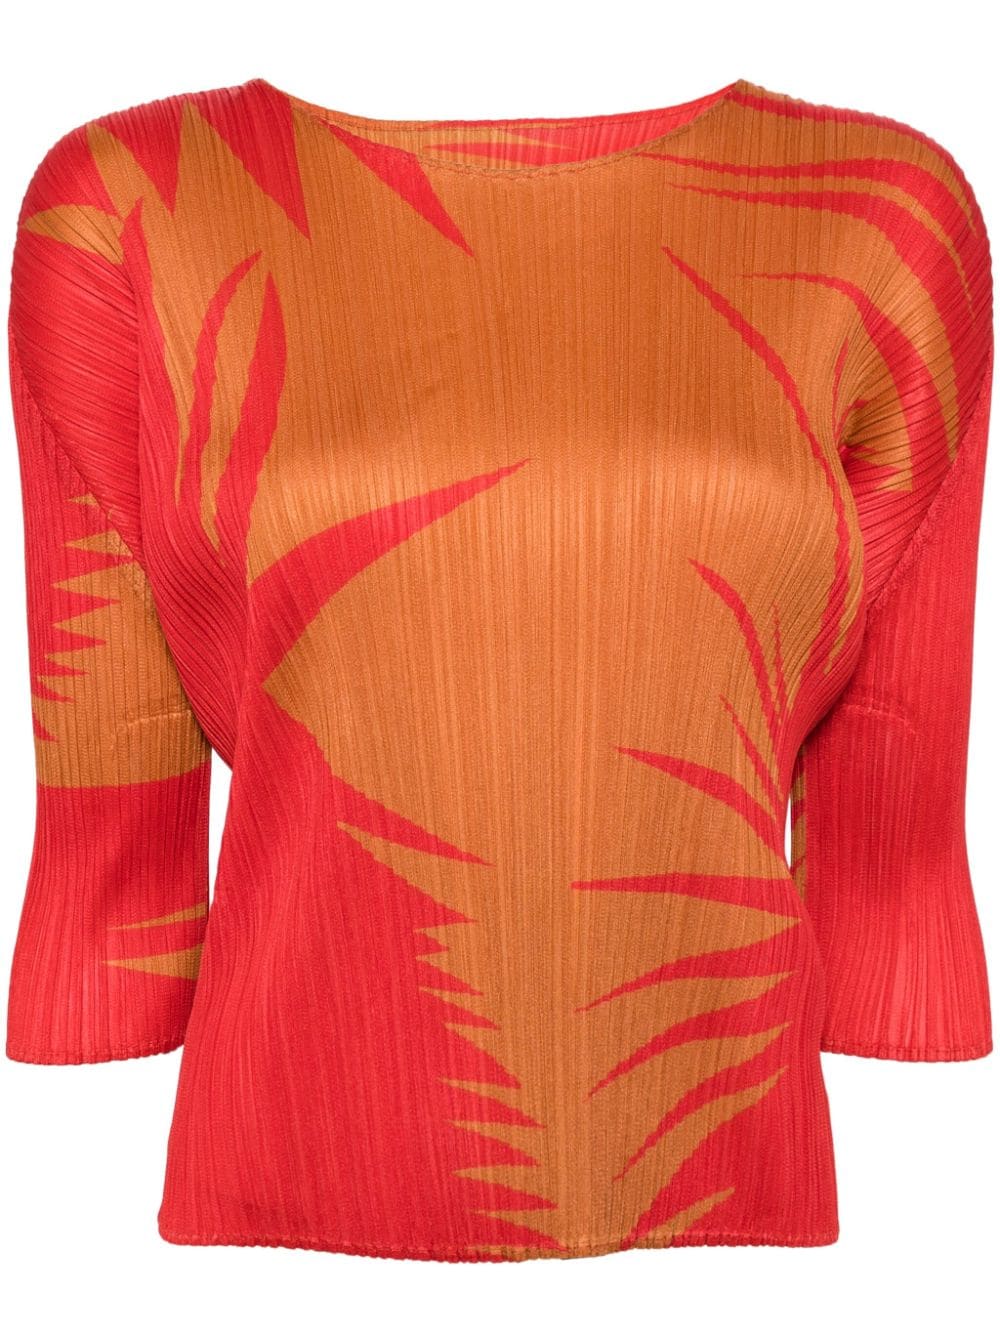 Pleats Please Issey Miyake PIQUANT pleated top - Red von Pleats Please Issey Miyake